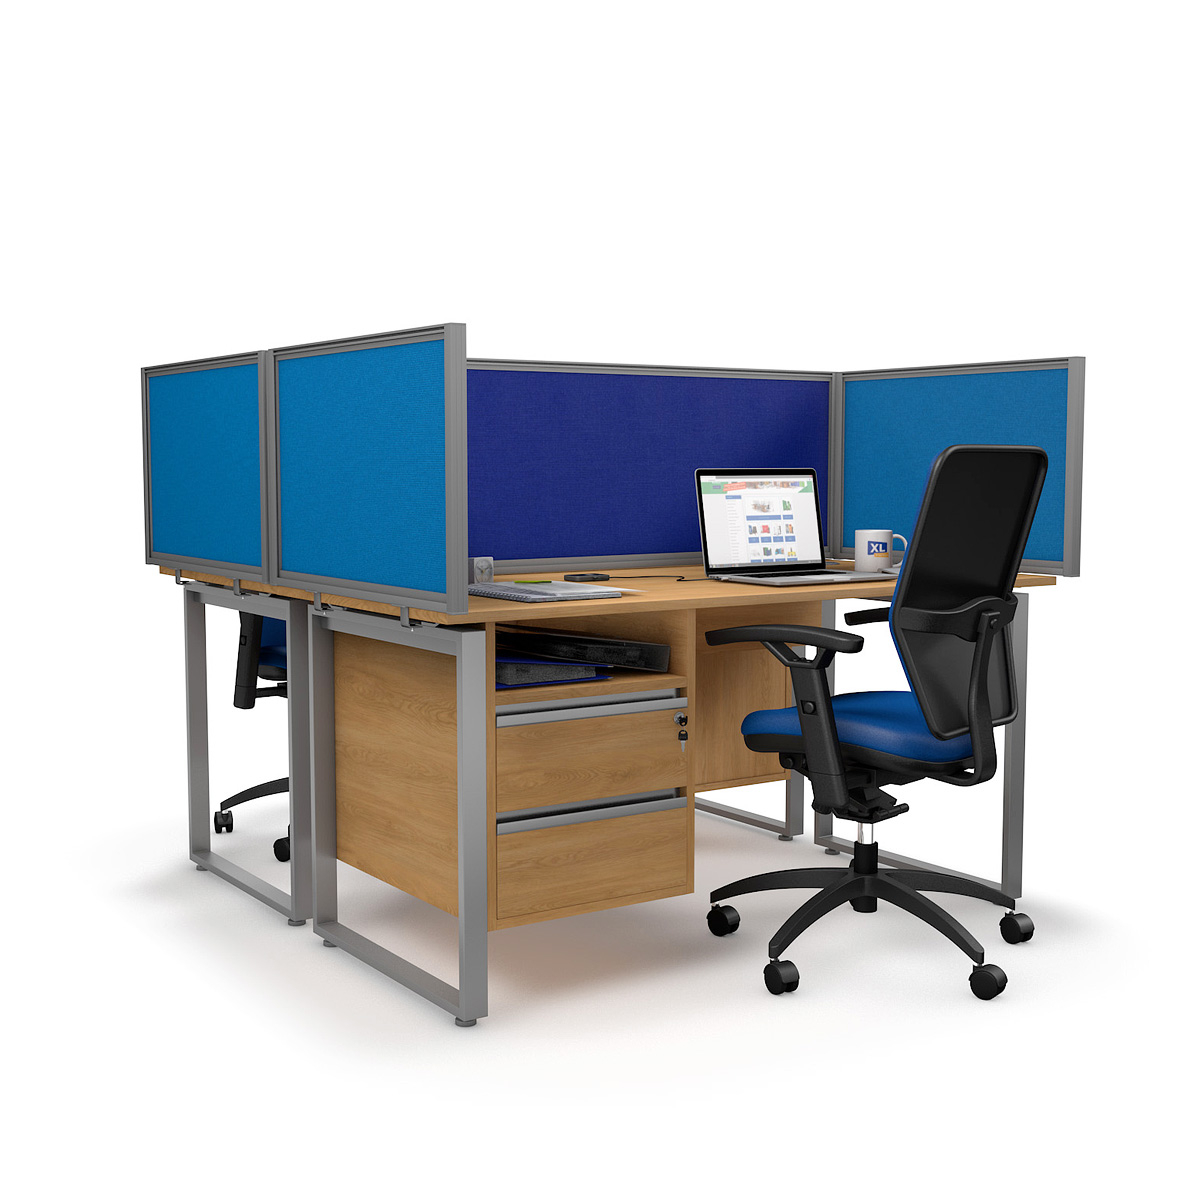 FRONTIER® Acoustic Office Desk Divider Screens Help Reduce Noise Pollution on Open Plan Offices